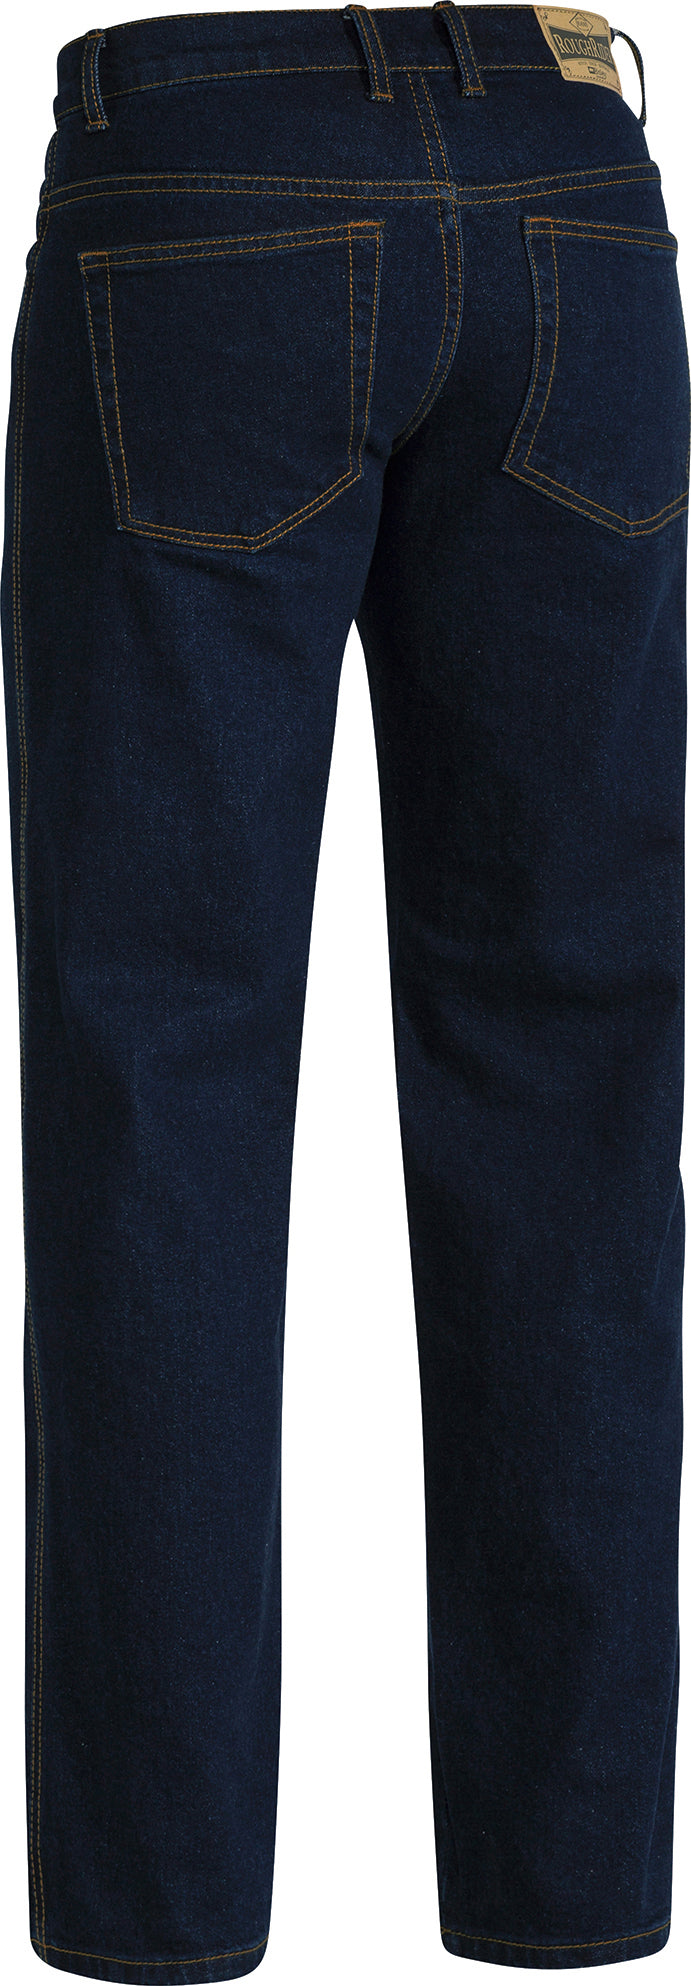 Load image into Gallery viewer, Wholesale BP6712 Bisley Rough Rider Denim Stretch Jeans - Long Printed or Blank
